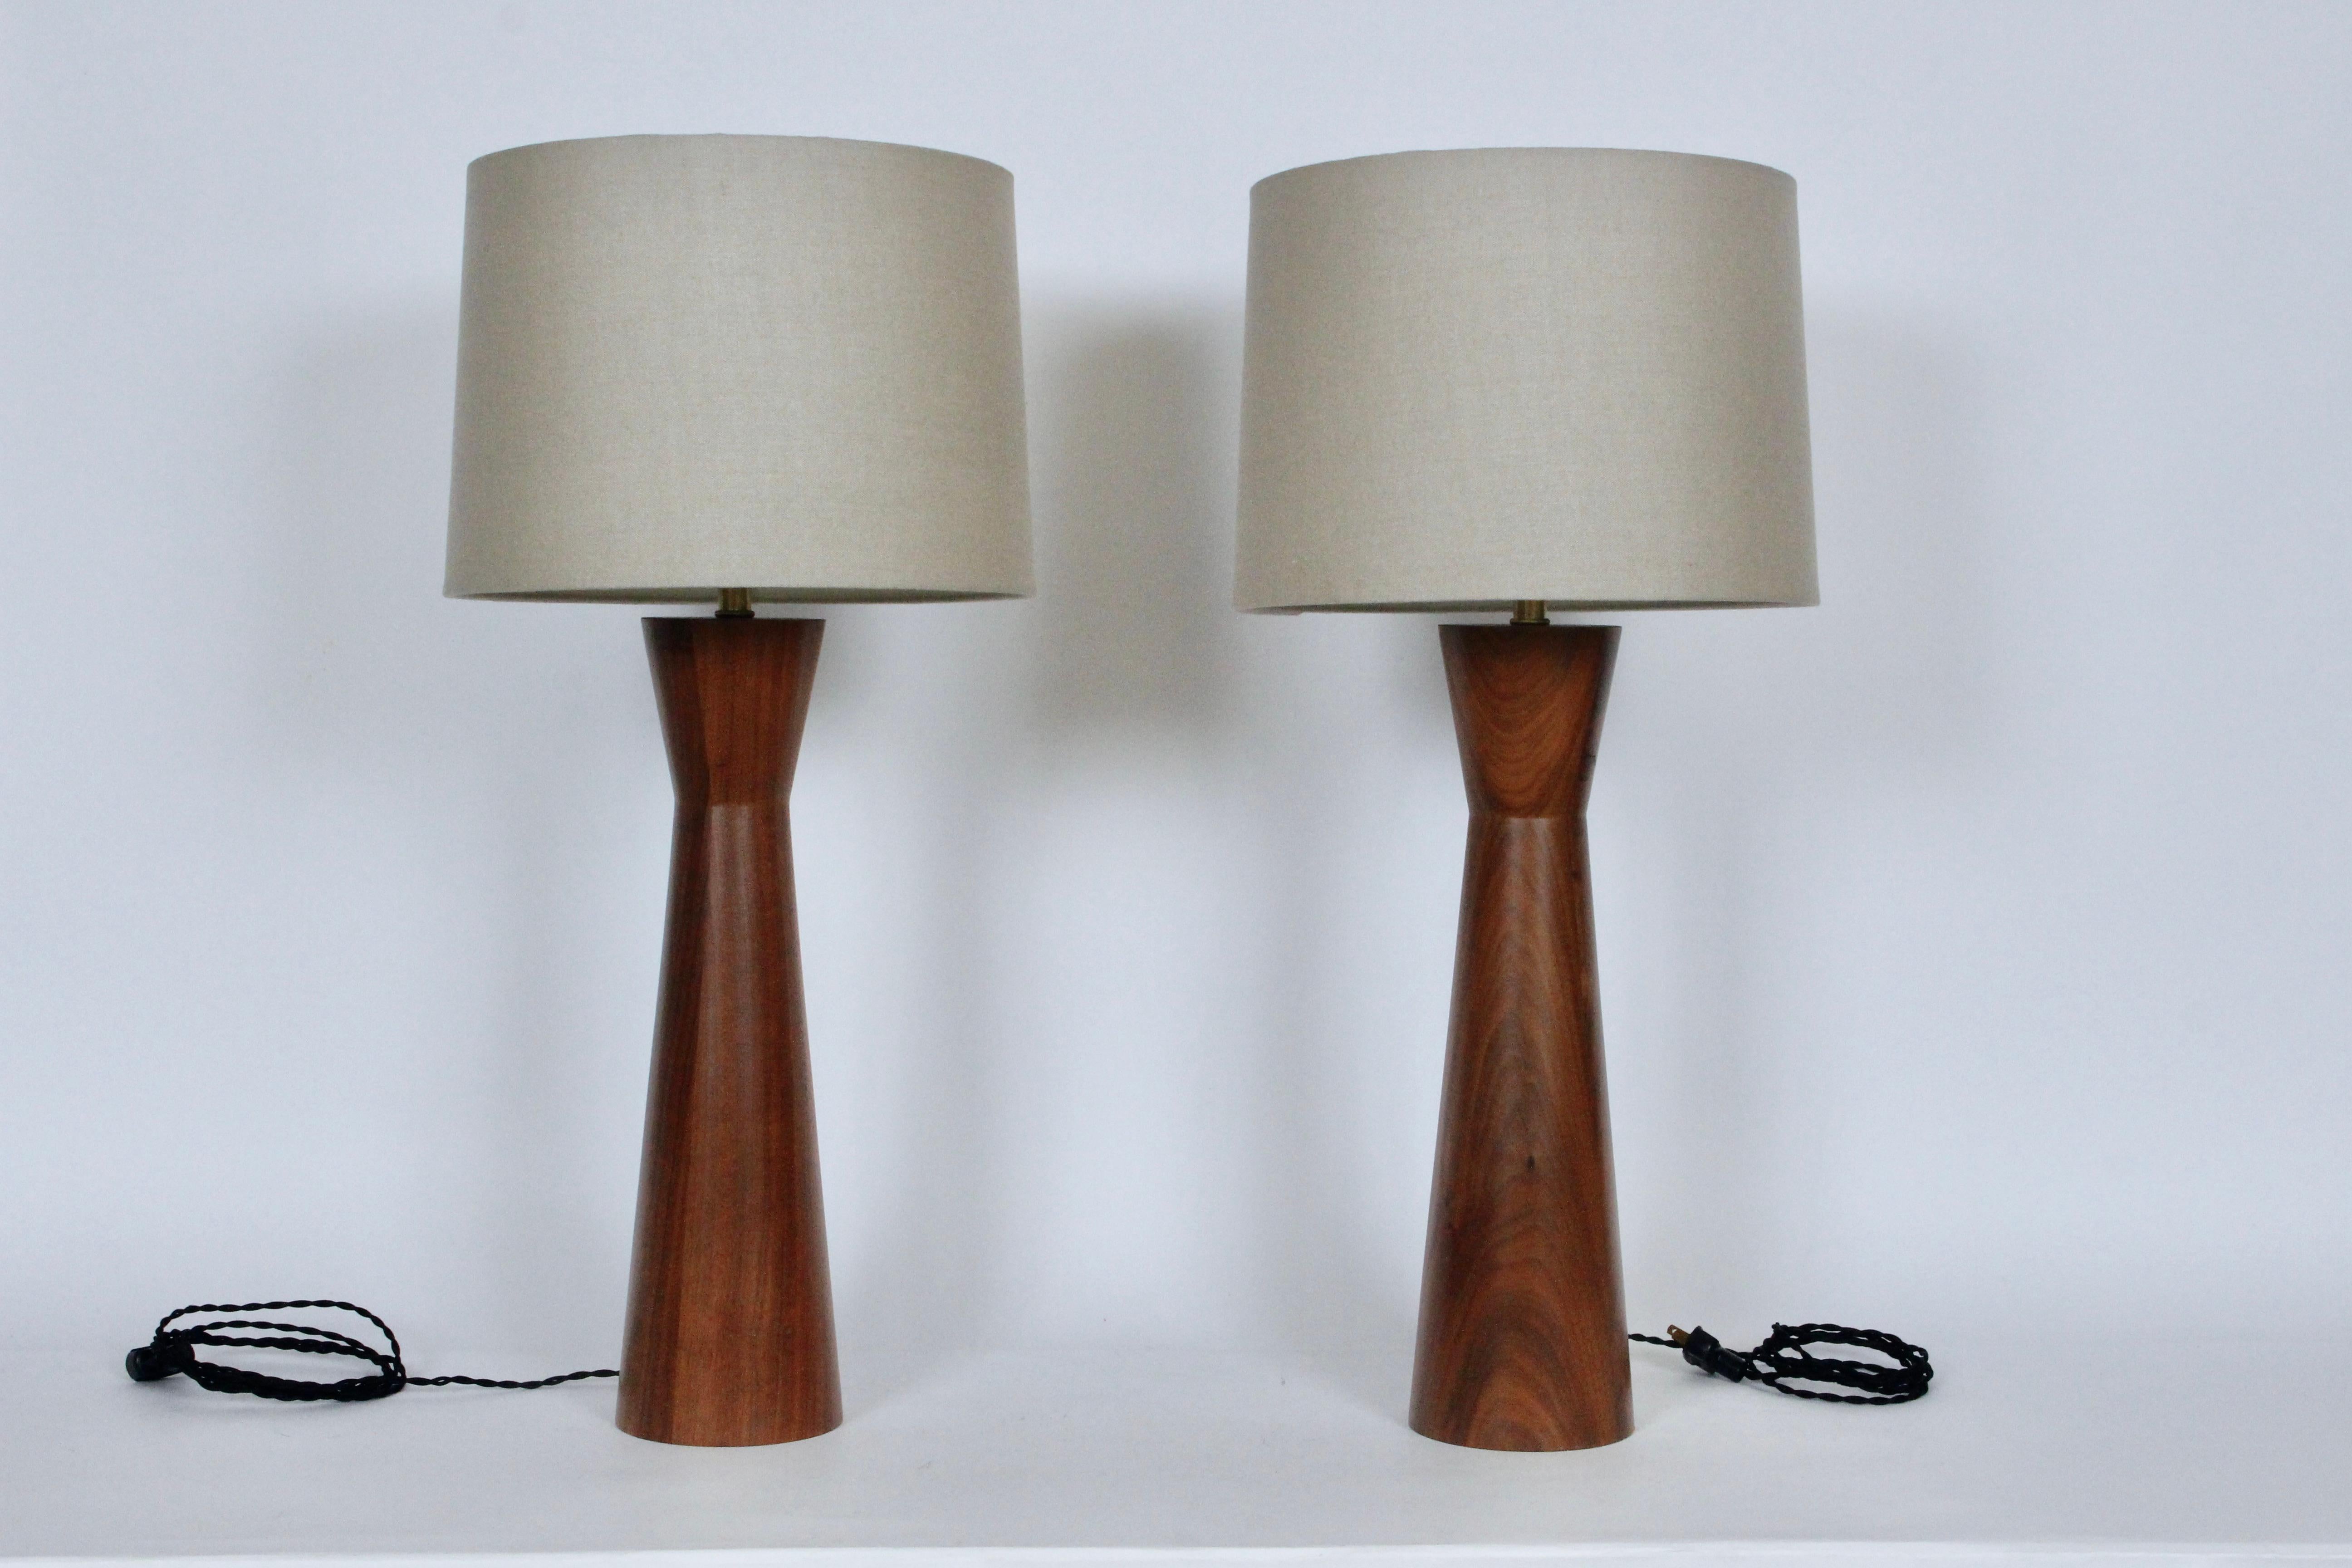 Pair of California Modern Raymond Pfennig for Zina Lamp Company walnut bedside table lamps, 1960s. Featuring a sculpted hourglass form in stacked walnut. Measure: 22H to top of socket, 18H to top of walnut. Lamp shades shown for display only and not